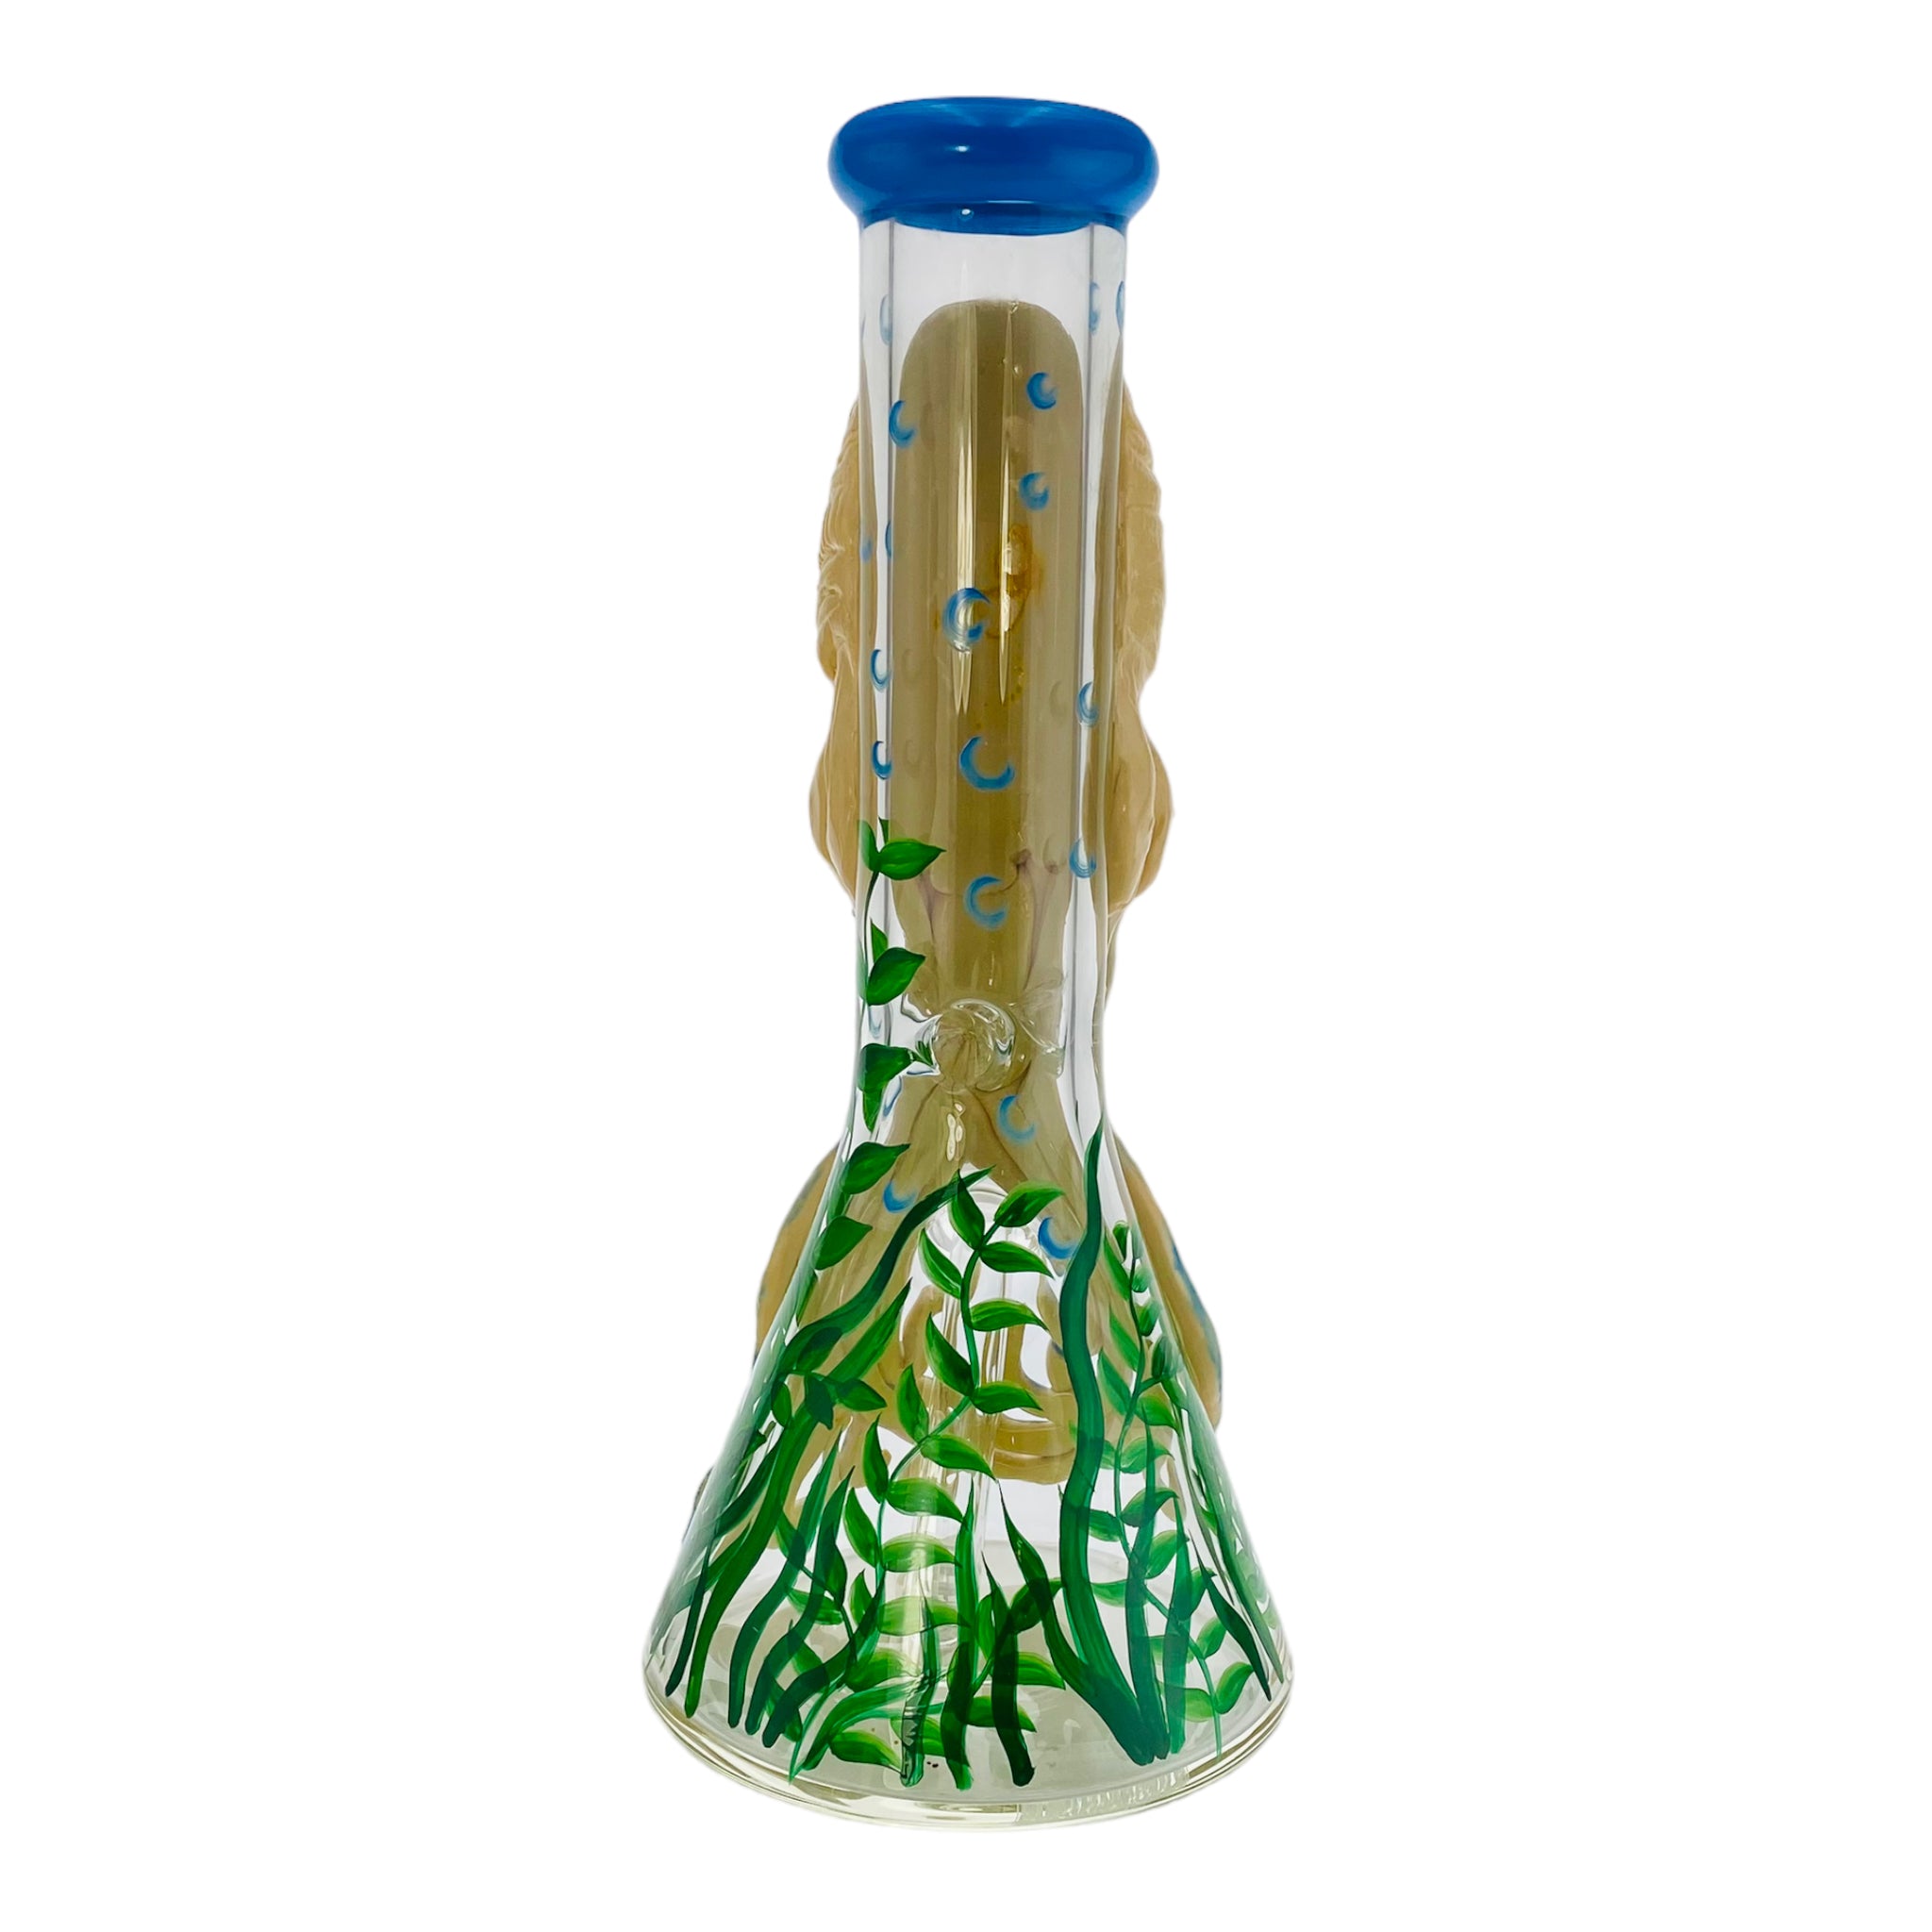 12 Inch Octopus Face Beaker Bong With Blue Mouthpiece anime and character bong